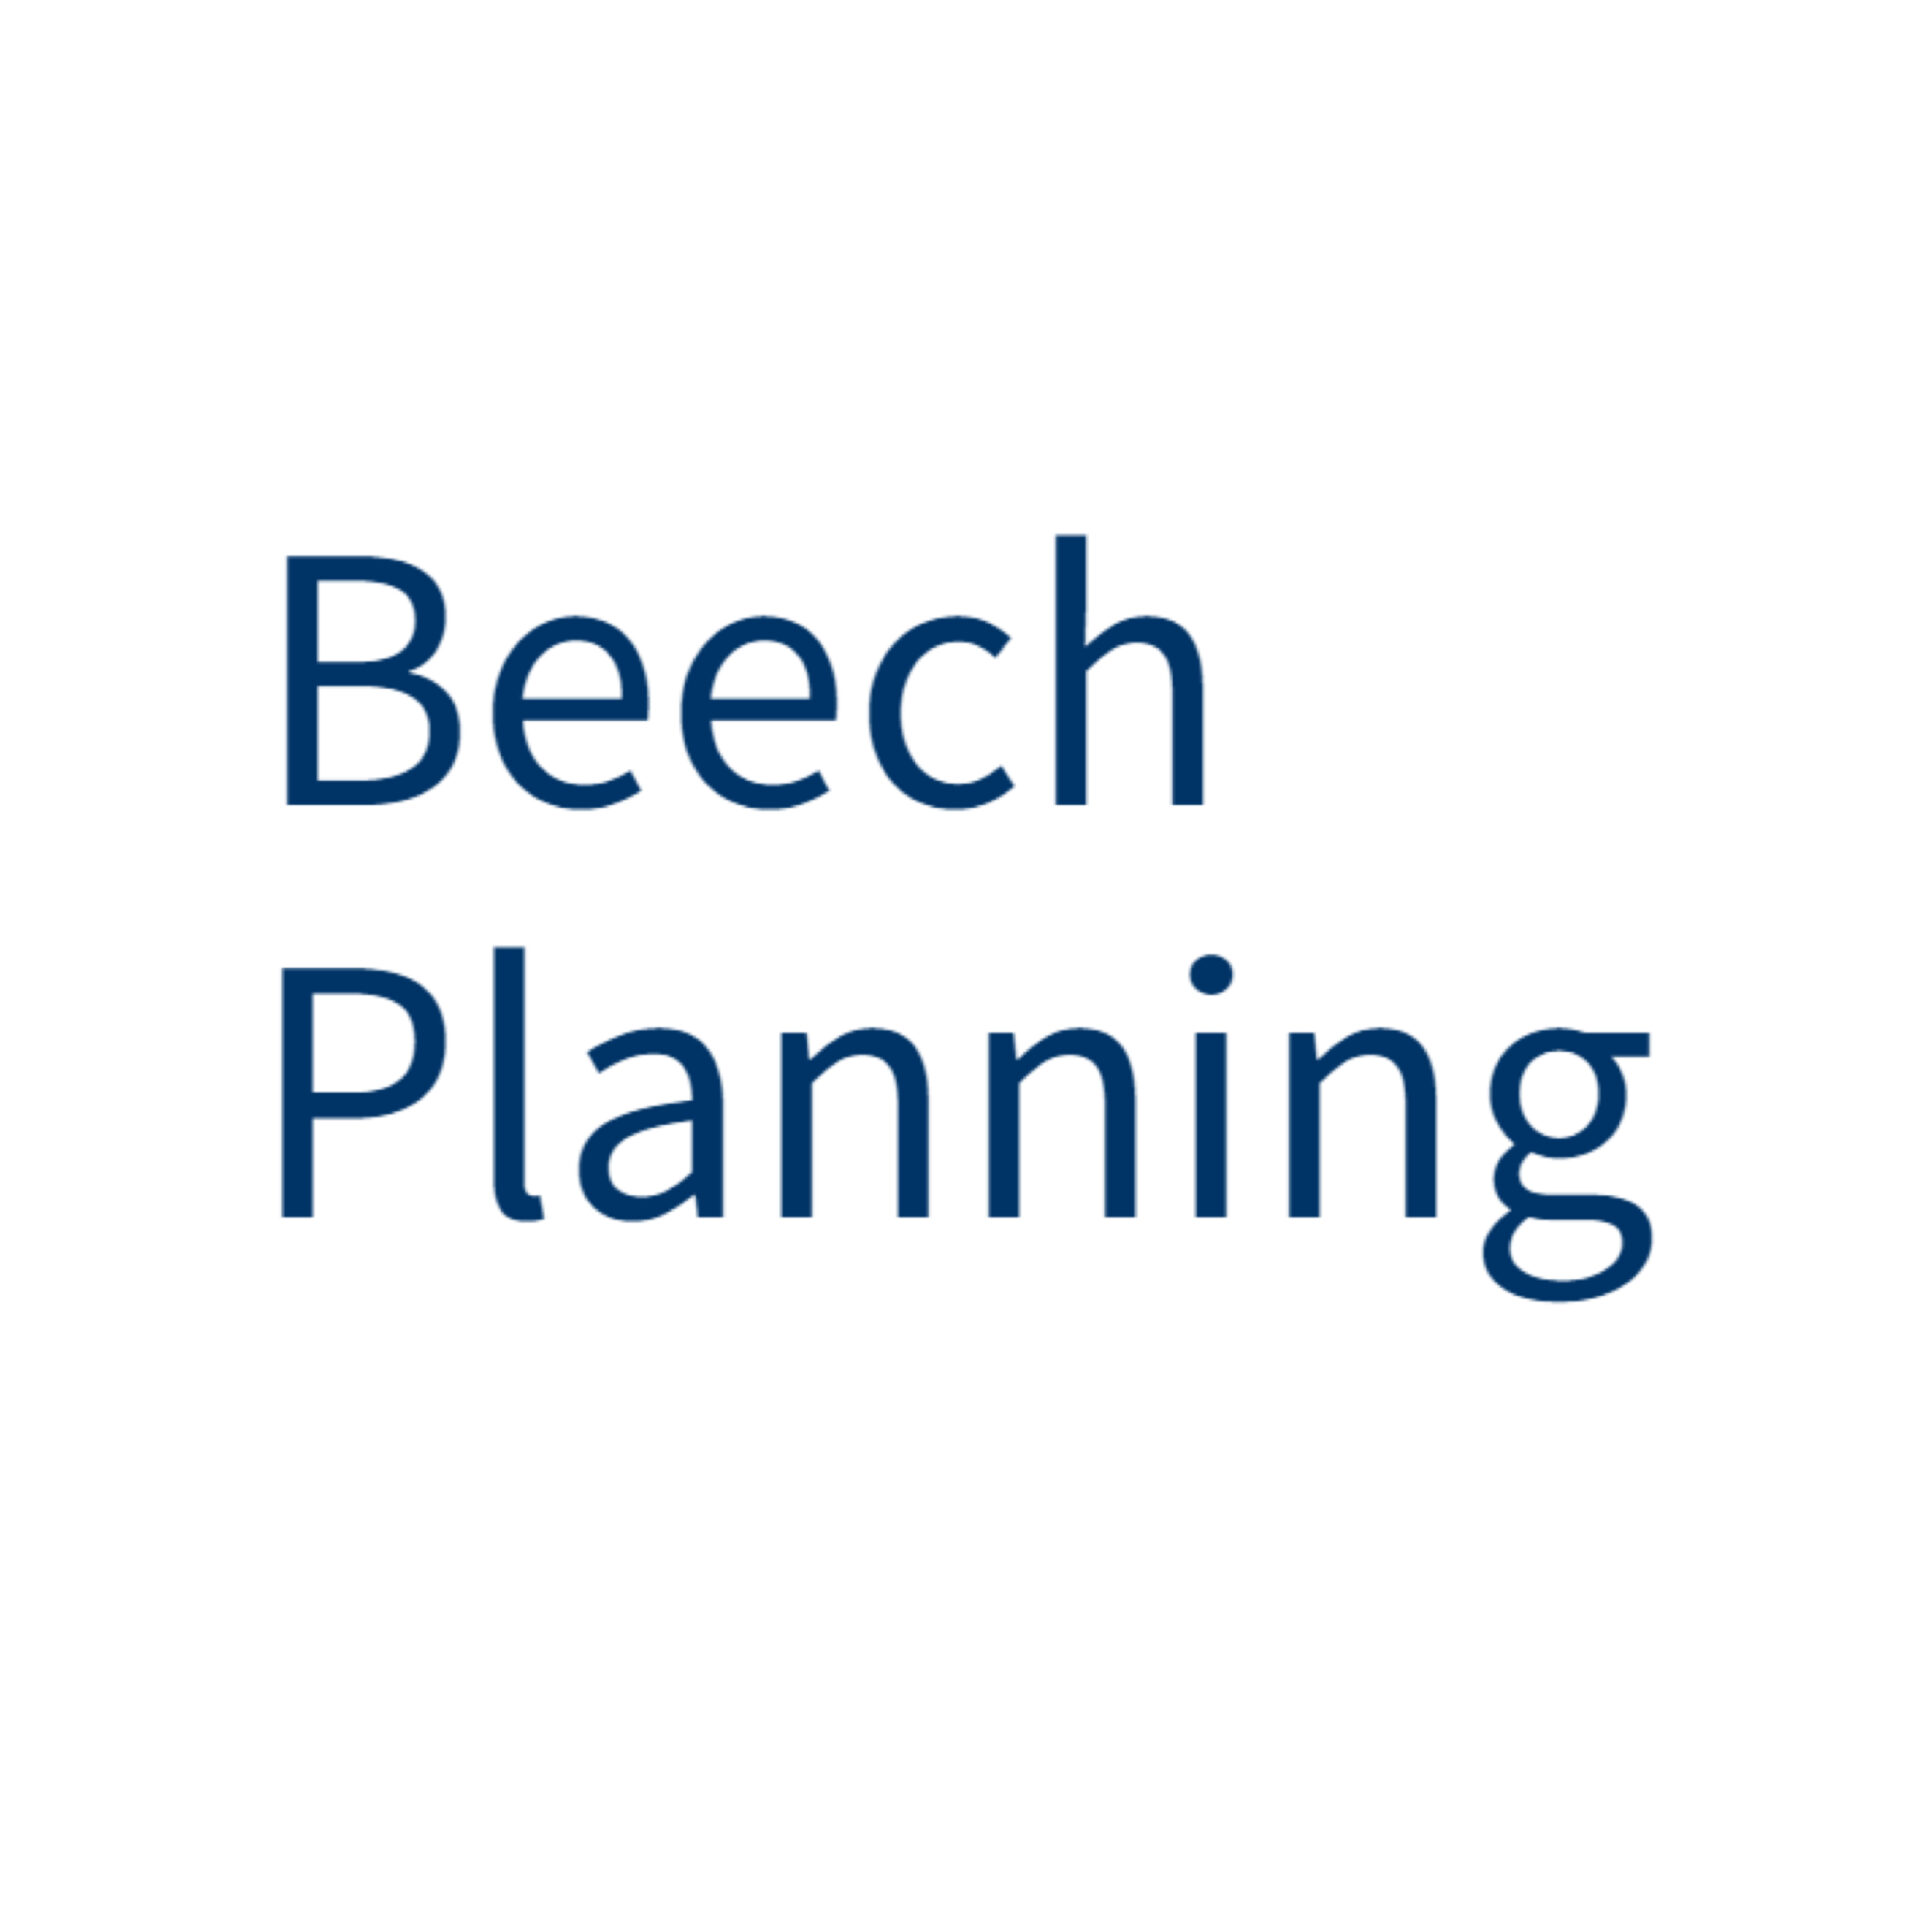 Beech Planning logo is text of the name.